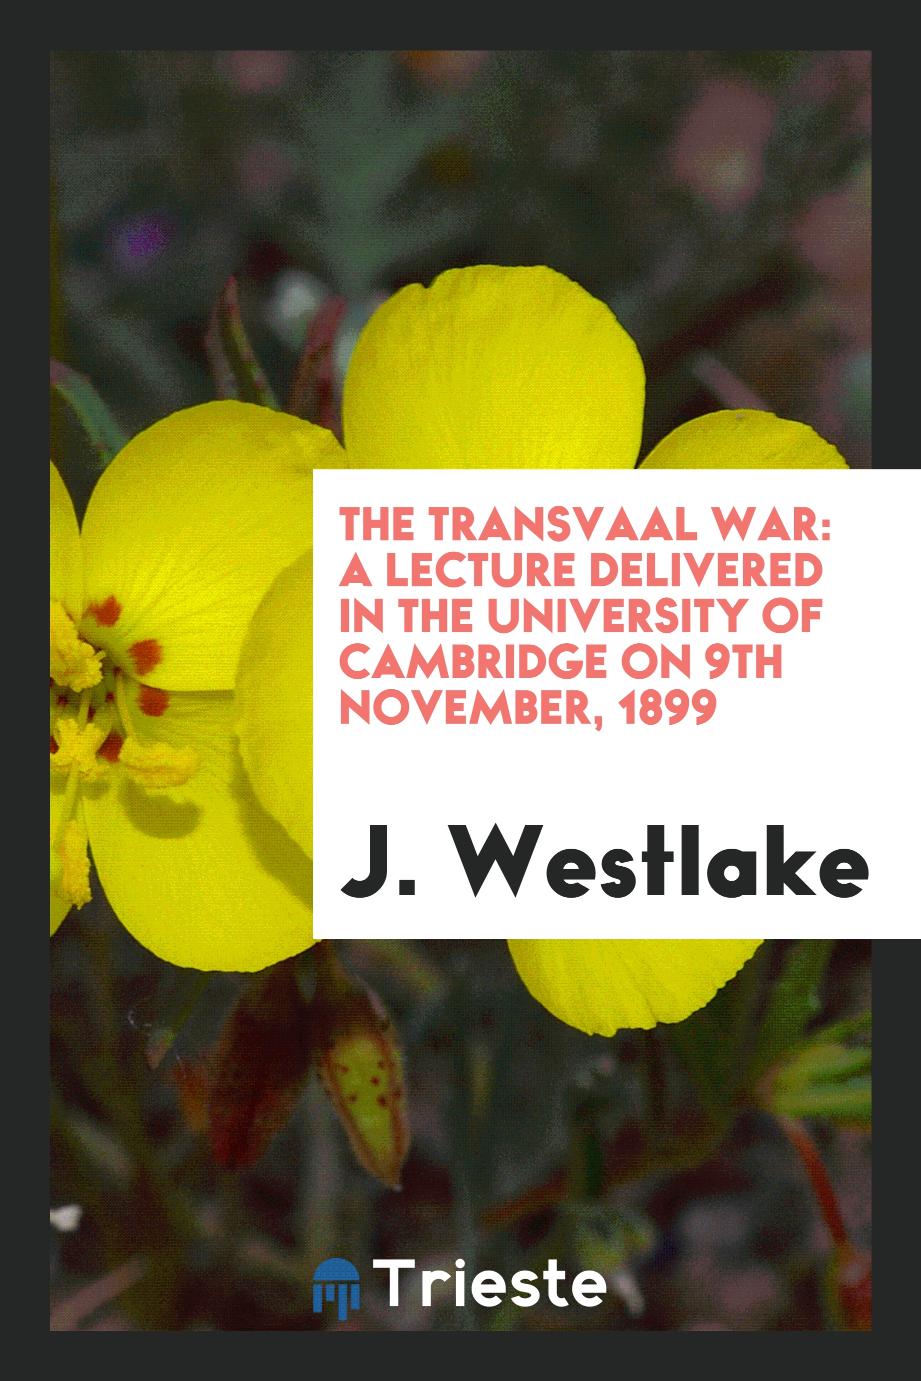 The Transvaal war: a lecture delivered in the University of Cambridge on 9th November, 1899